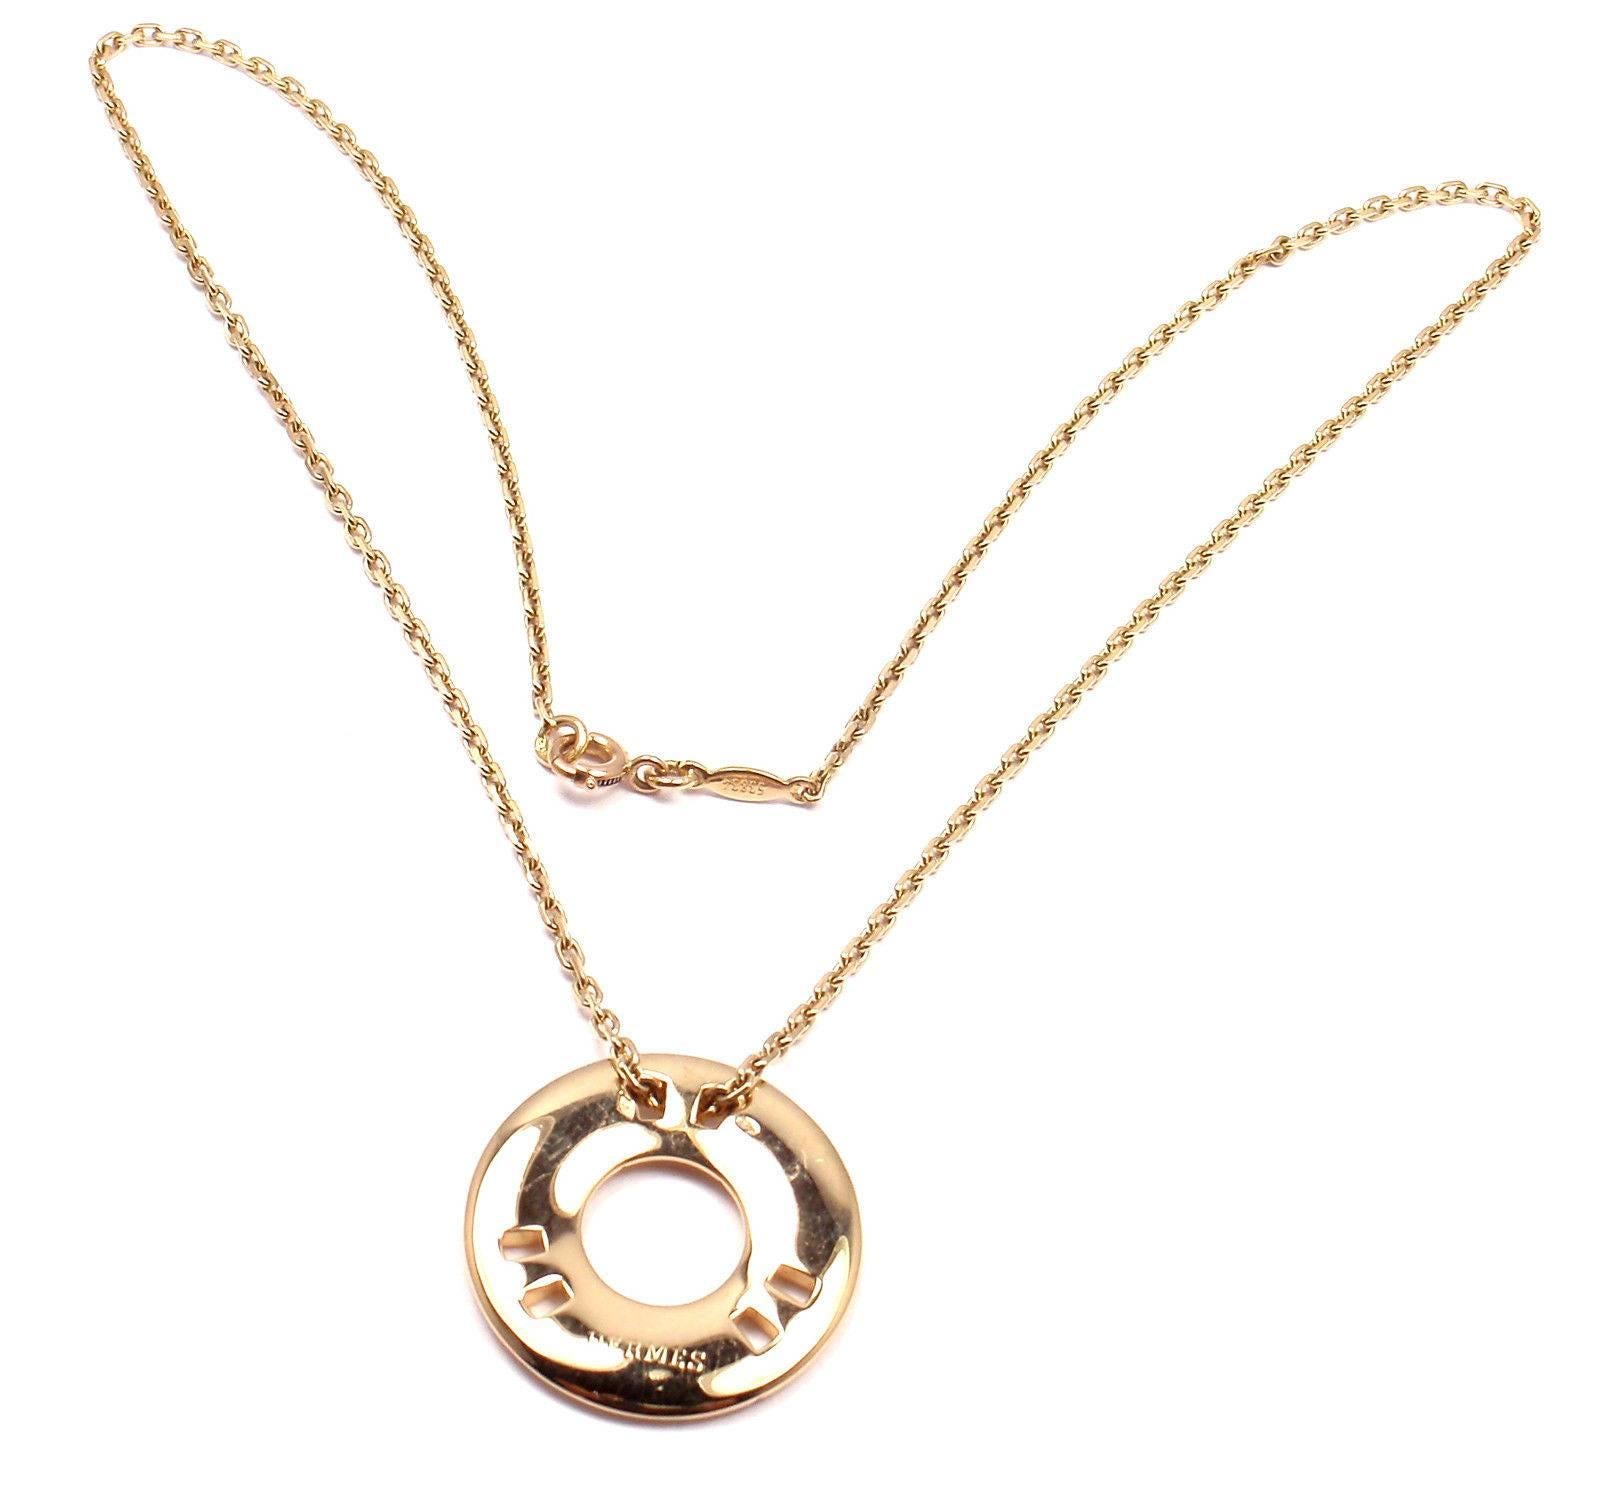 18k Yellow Gold H Round Pendant Necklace by Hermes. 

Details: 
Weight: 14.3 grams
Pendant Size: 24mm
Necklace Length: 15.5